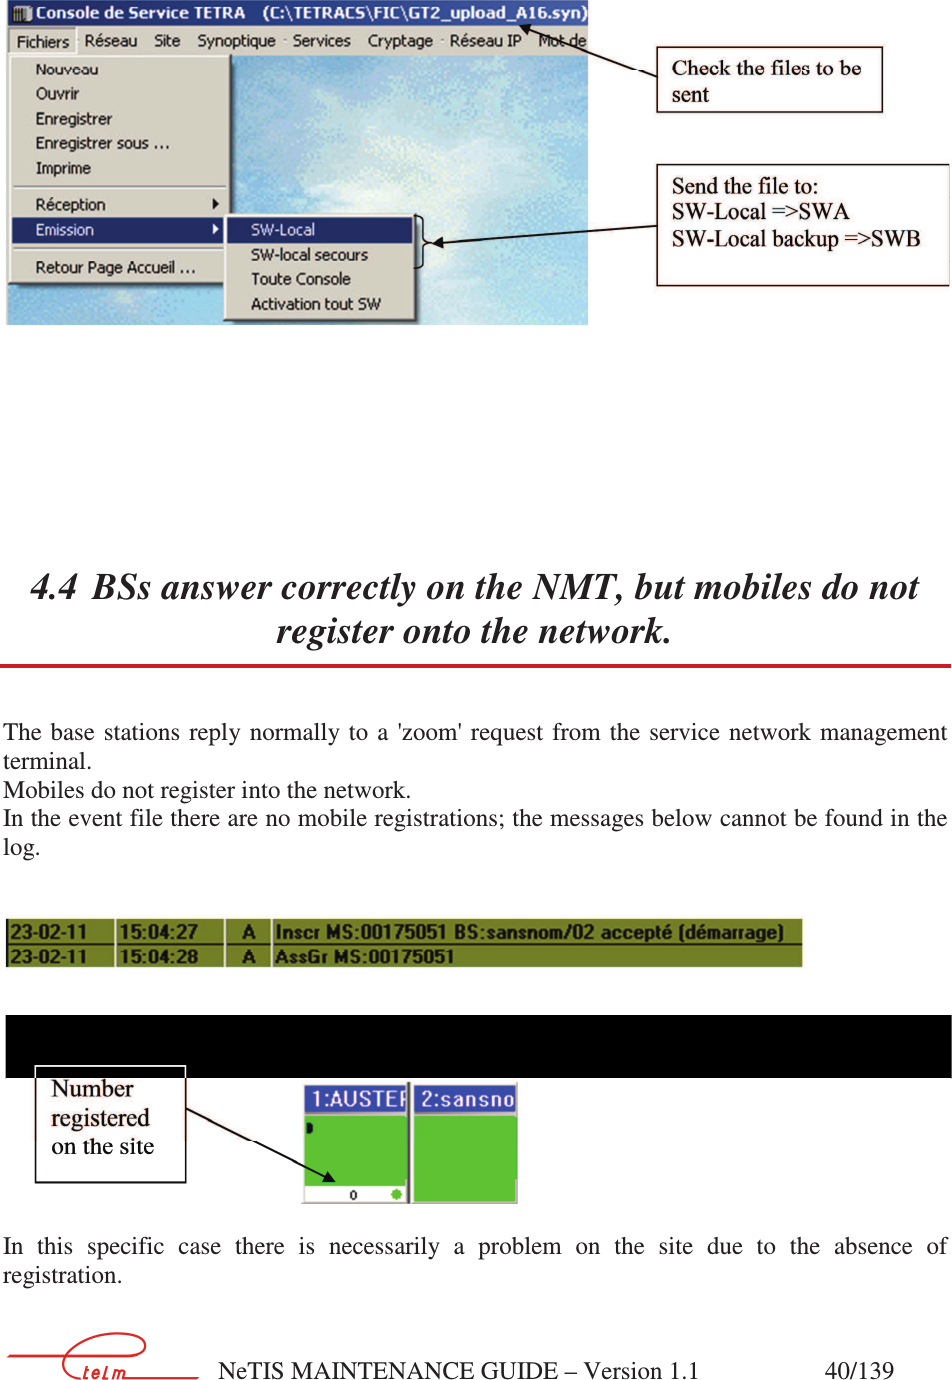        NeTIS MAINTENANCE GUIDE – Version 1.1                    40/139          4.4 BSs answer correctly on the NMT, but mobiles do not register onto the network. The base stations  reply normally to  a &apos;zoom&apos; request from  the service  network management terminal.  Mobiles do not register into the network. In the event file there are no mobile registrations; the messages below cannot be found in the log.    In  this  specific  case  there  is  necessarily  a  problem  on  the  site  due  to  the  absence  of registration.  